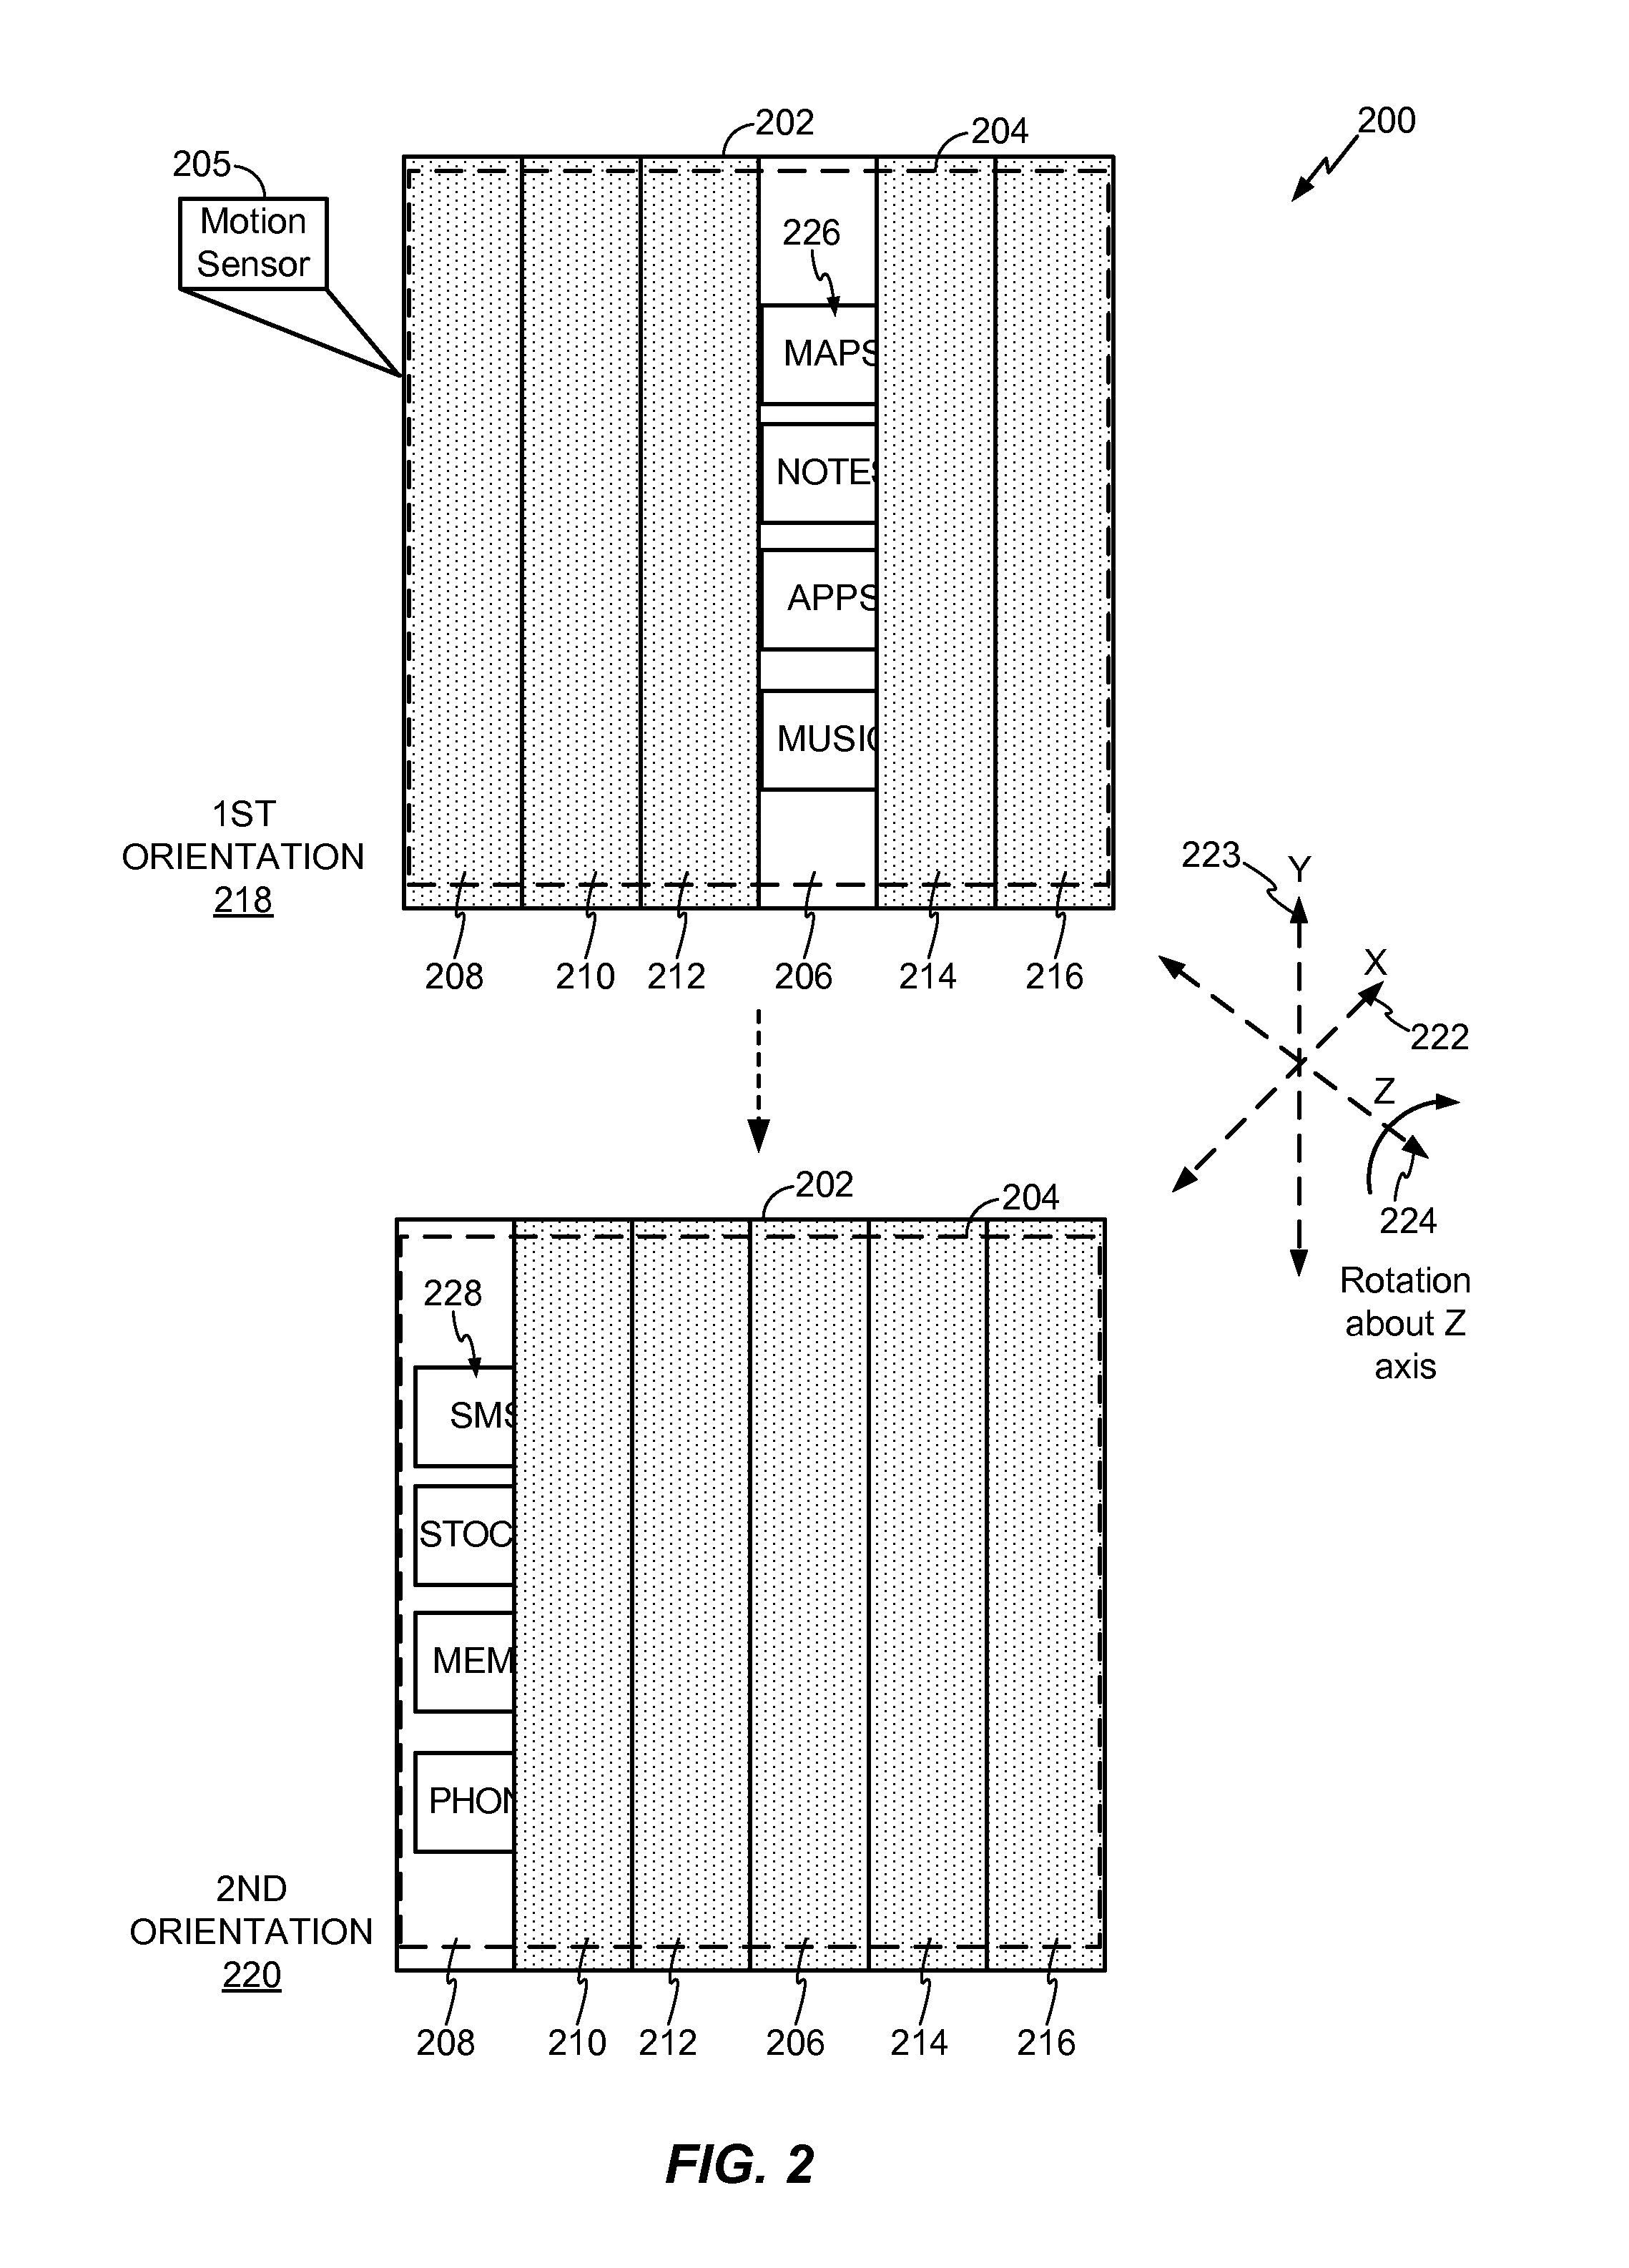 Extending battery life of a portable electronic device